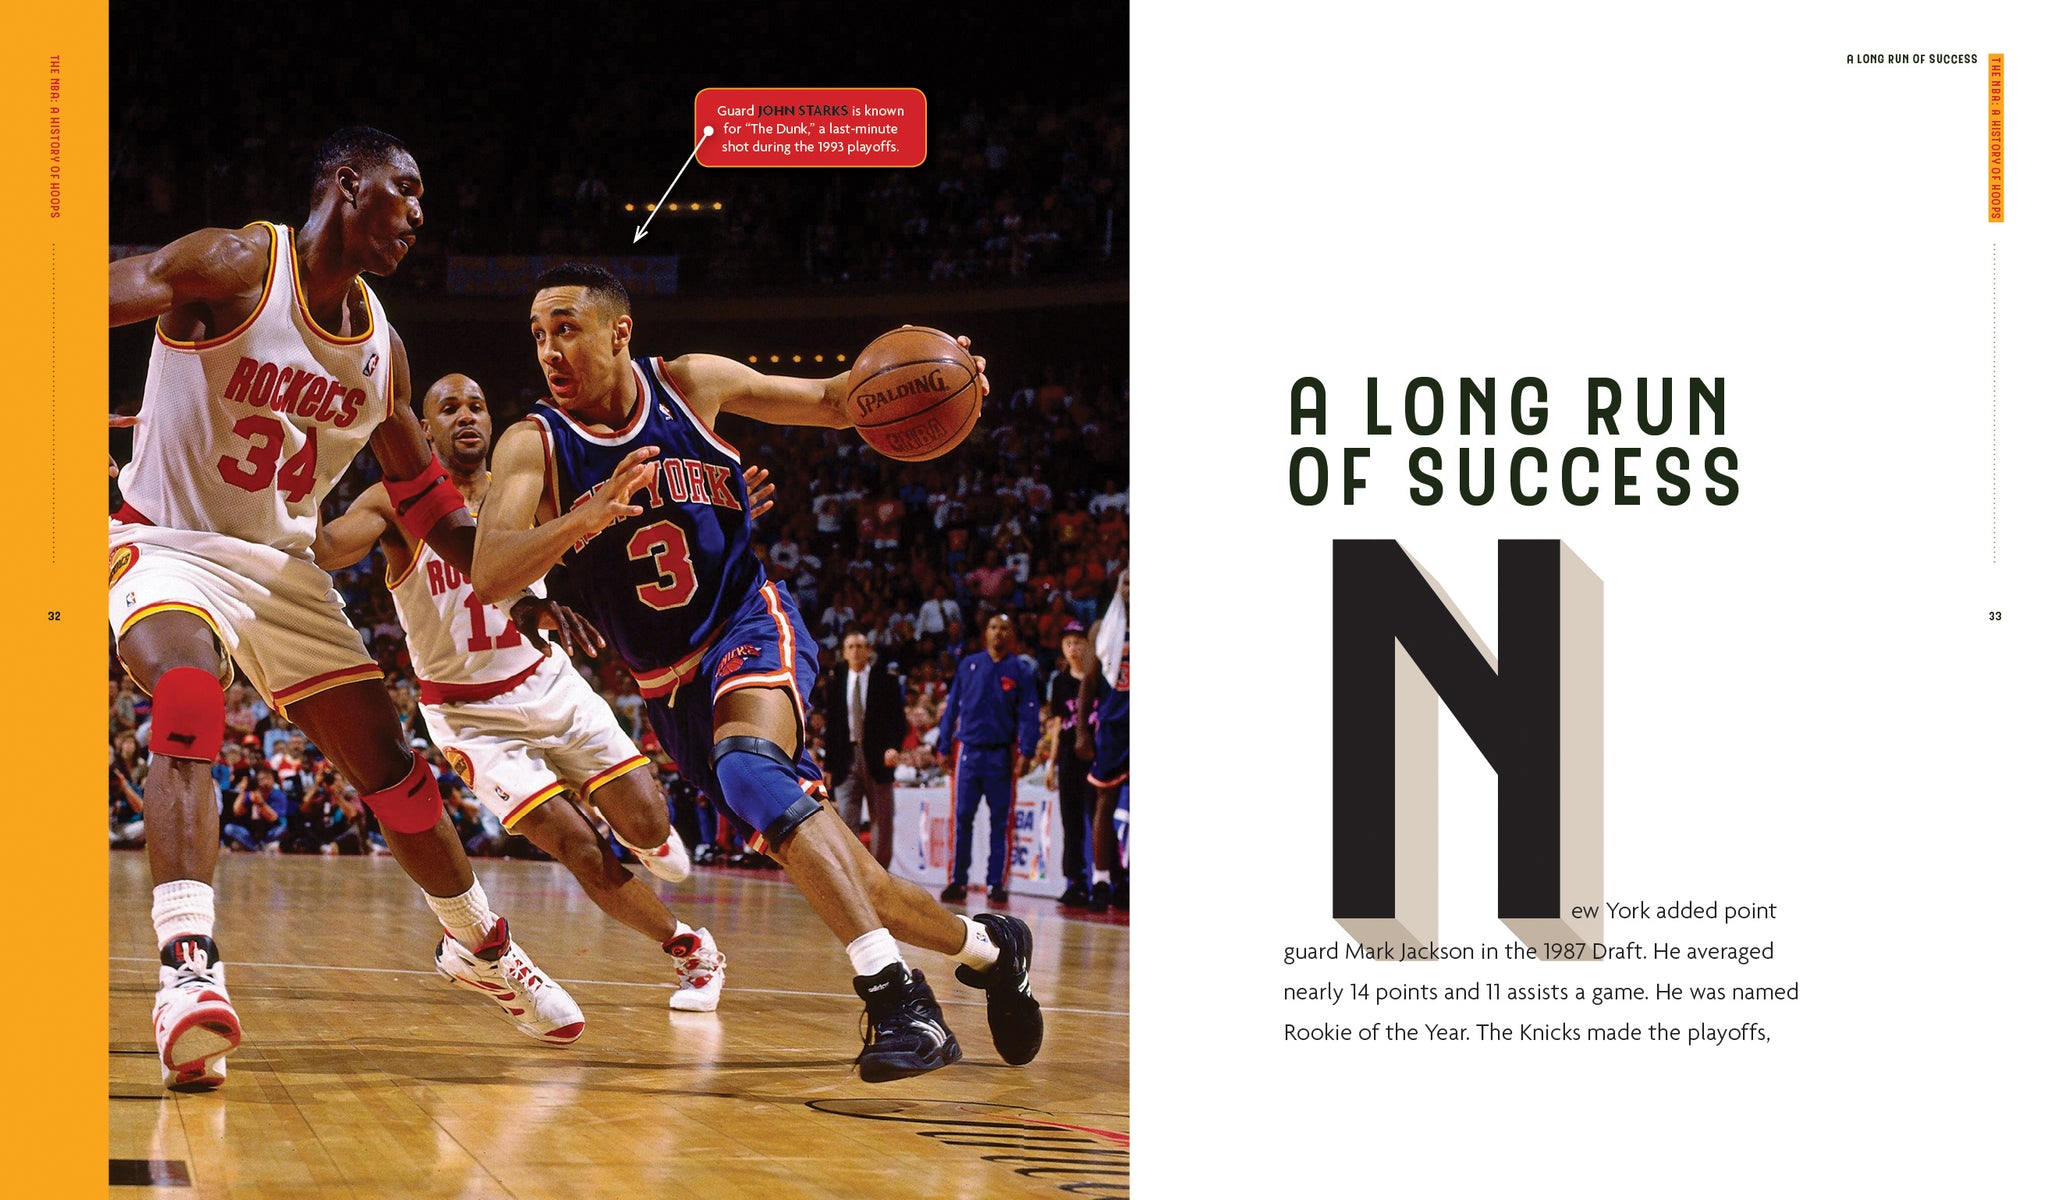 The NBA: A History of Hoops: New York Knicks – The Creative